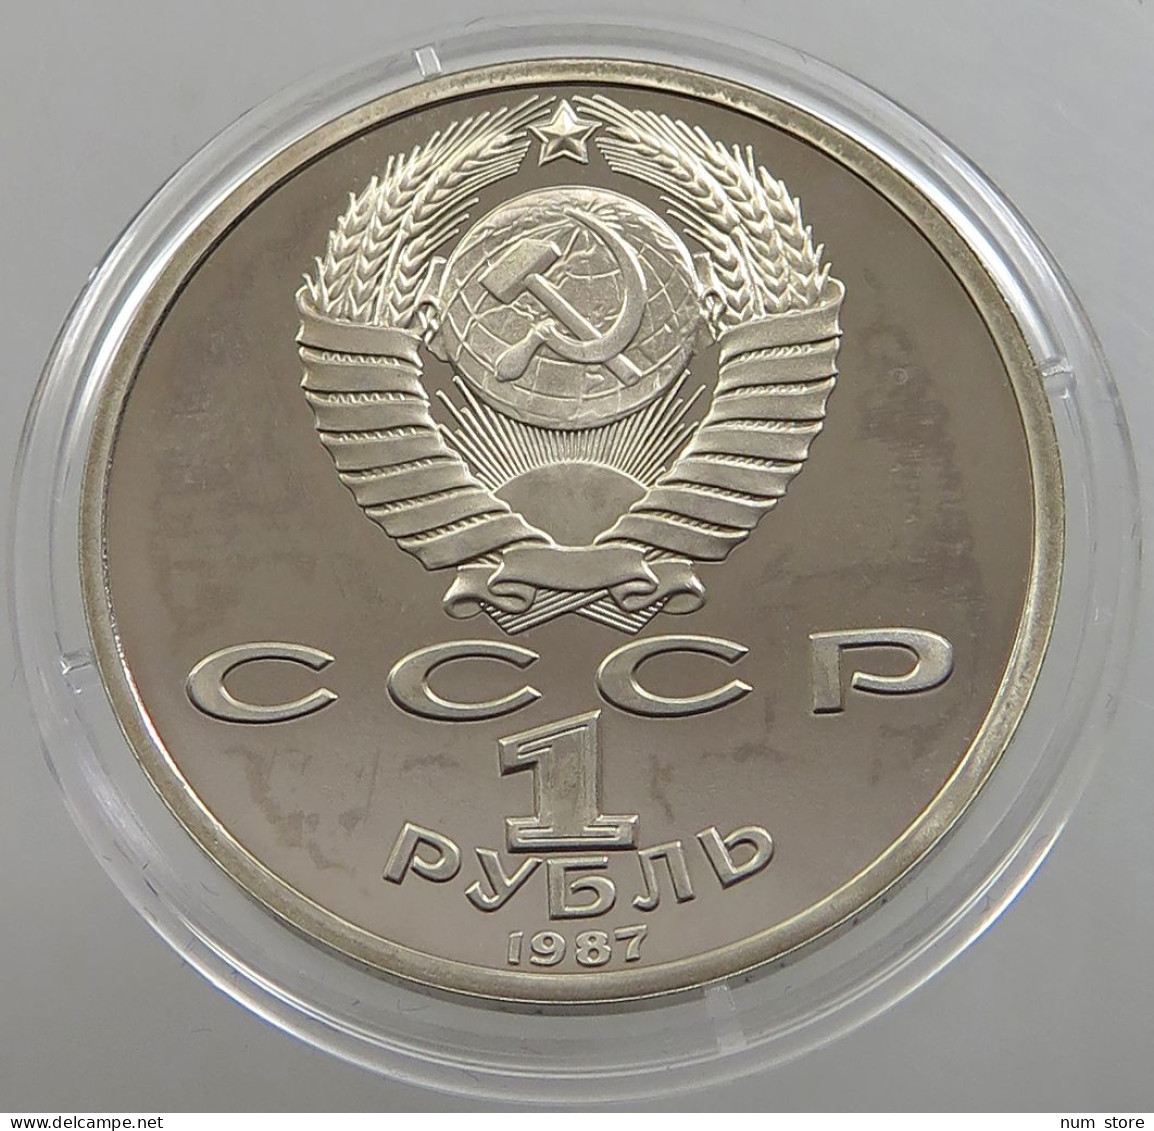 RUSSIA USSR 1 ROUBLE 1987 PROOF #sm14 0621 - Russia